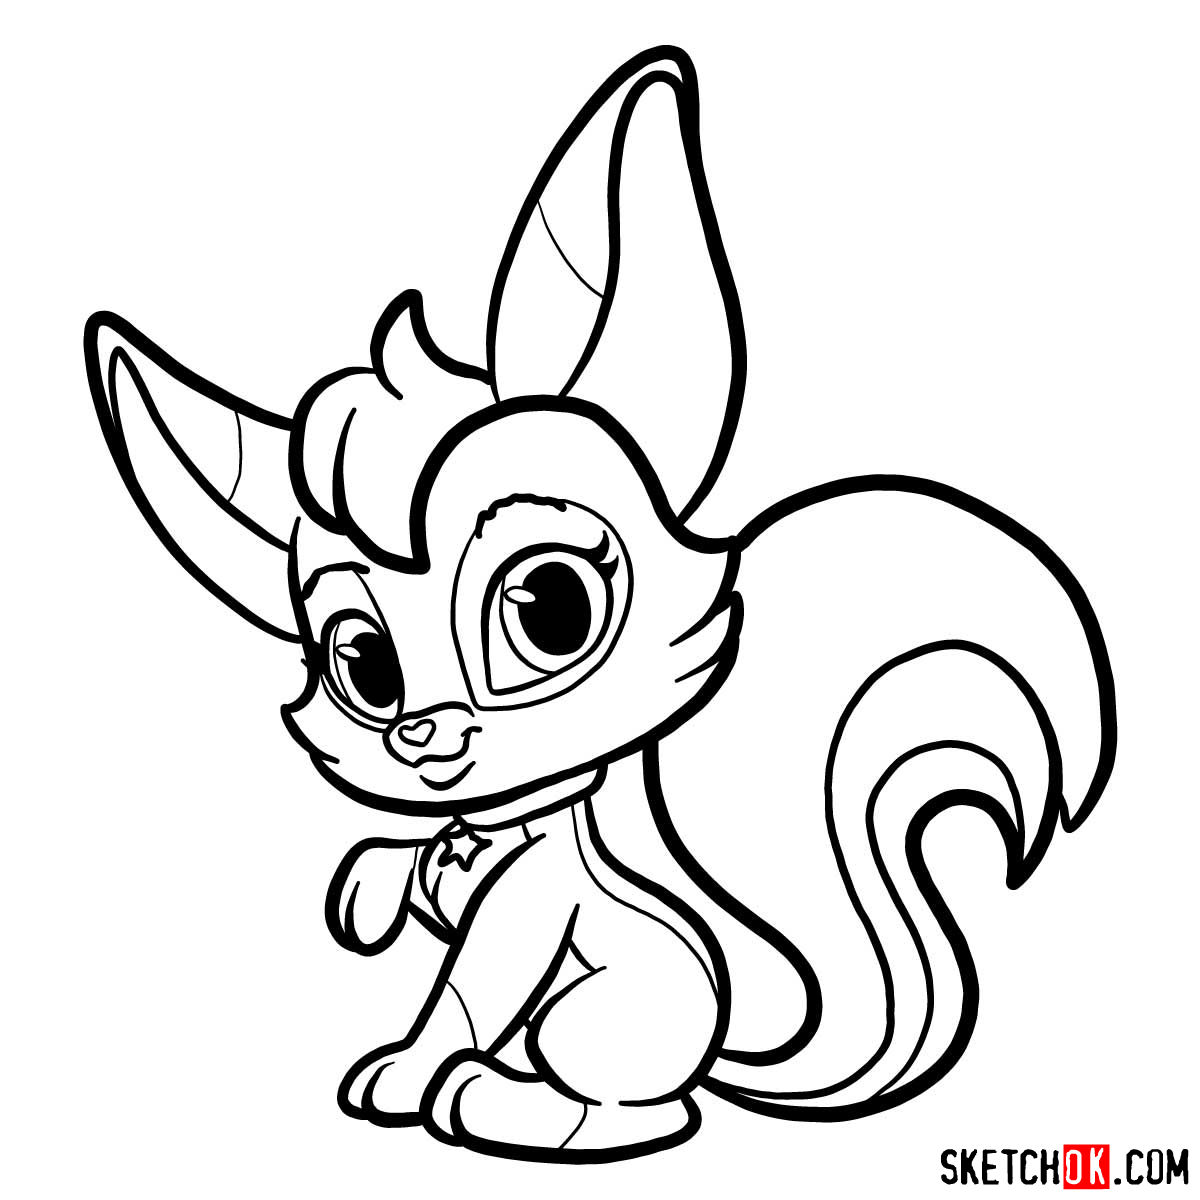 How to draw Parisa, a pet from Shimmer and Shine